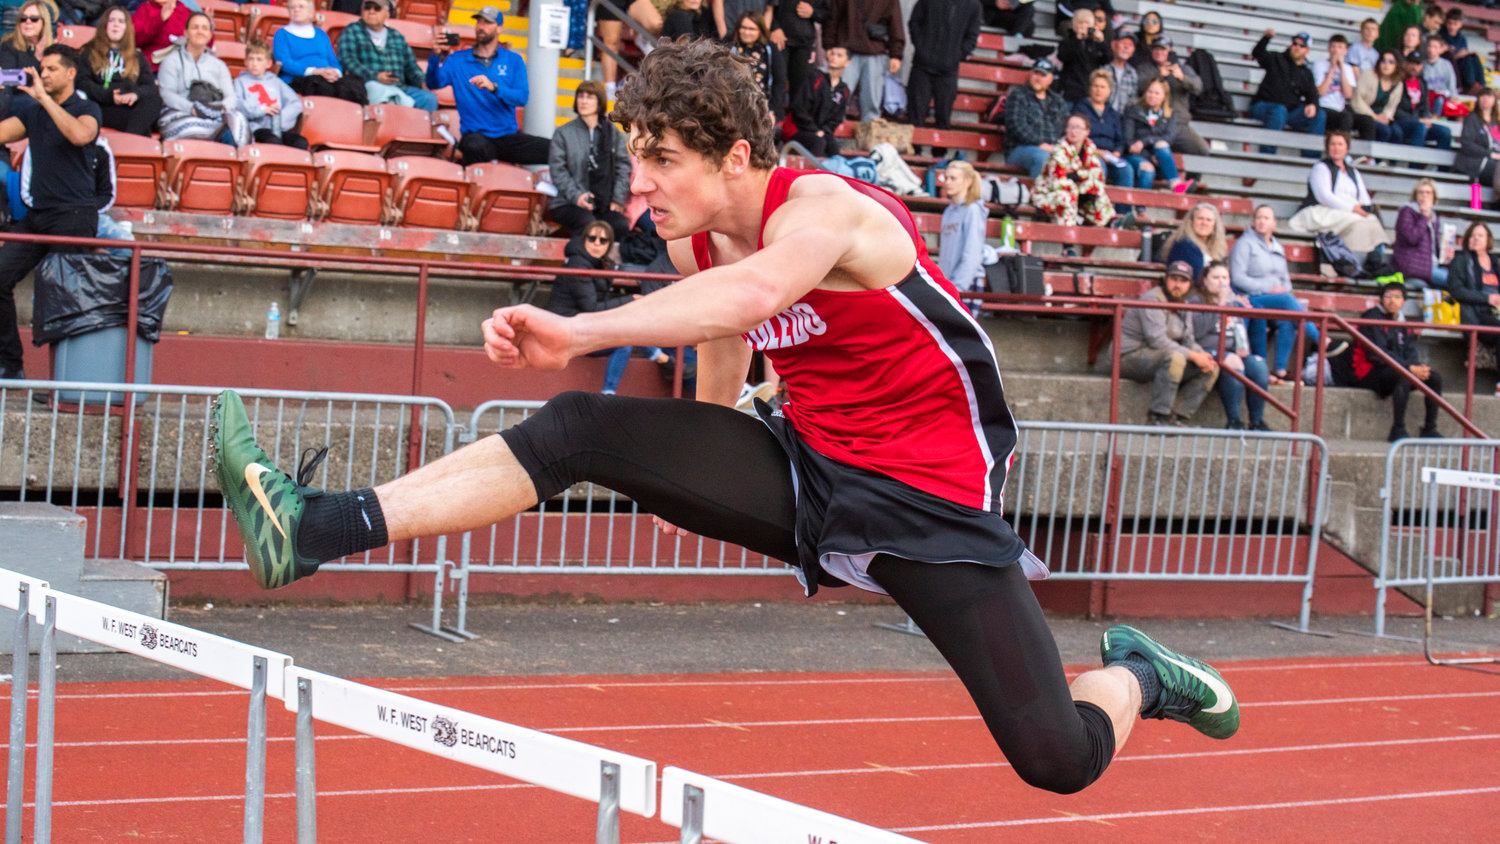 A Toledo Riverhawk flies over hurdles at W.F. West High School in Chehalis on Friday.